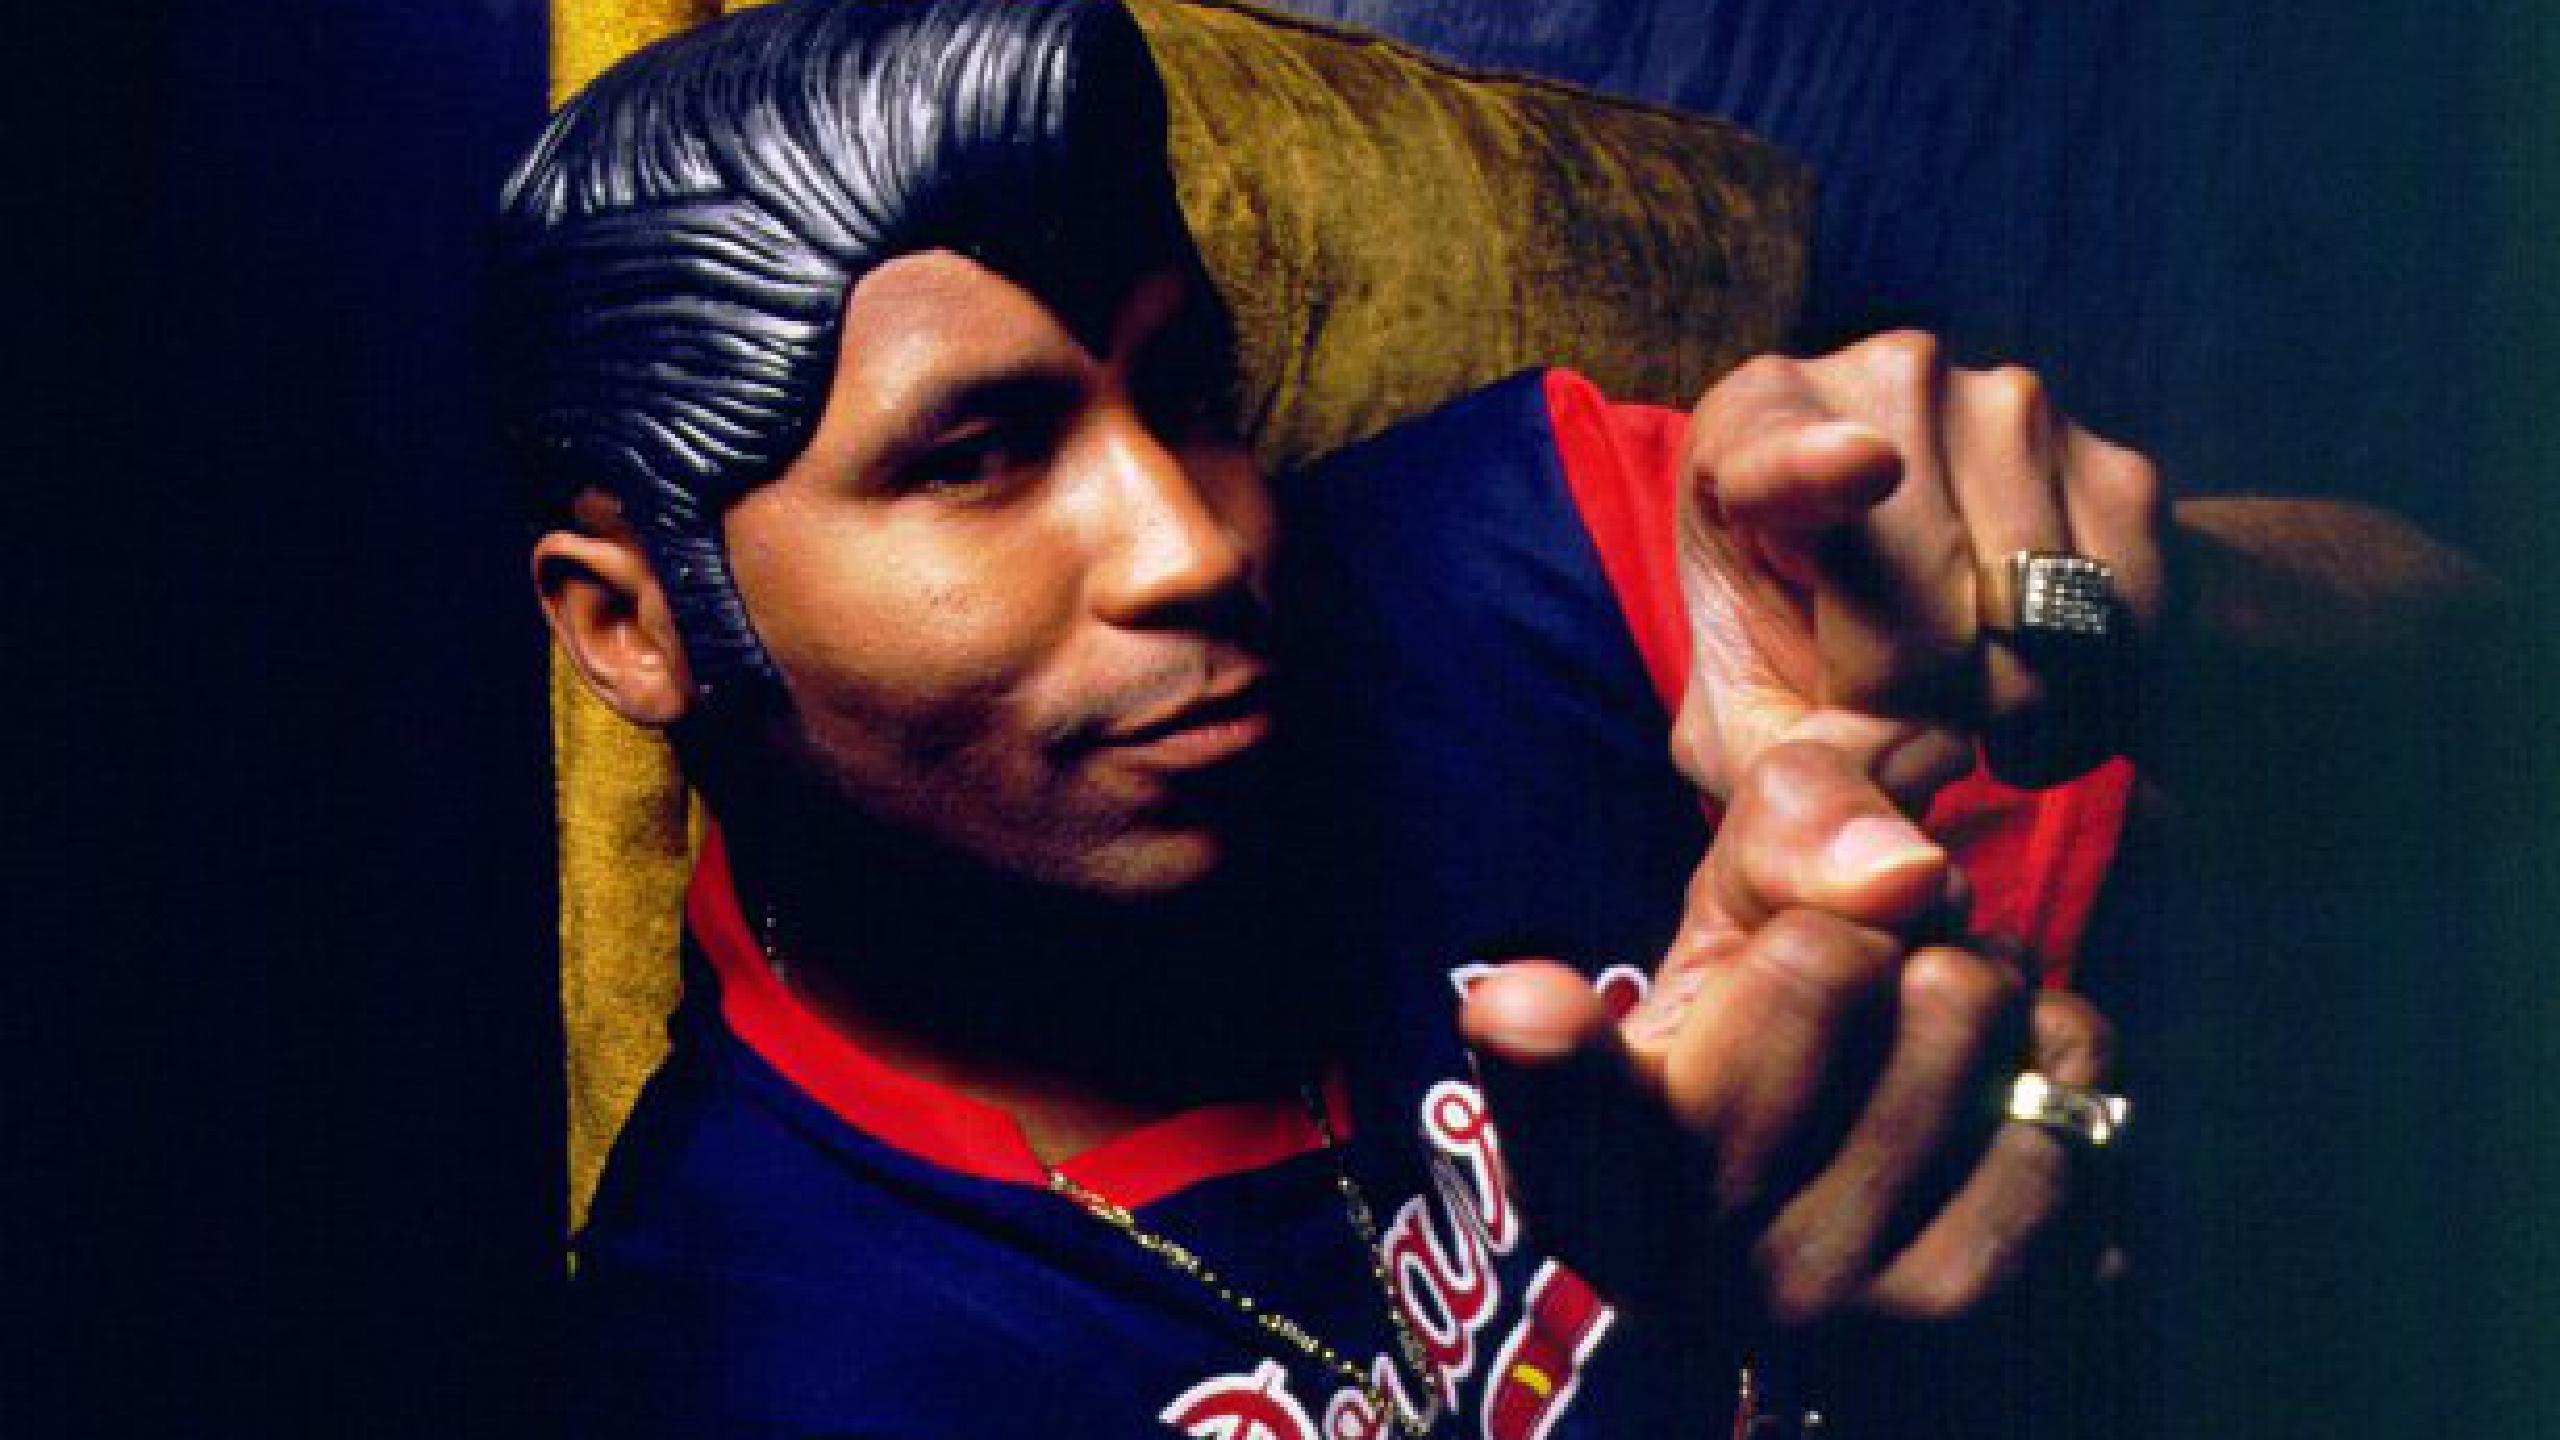 Kool Keith Tickets Concerts and Tours 2023 2024 Wegow